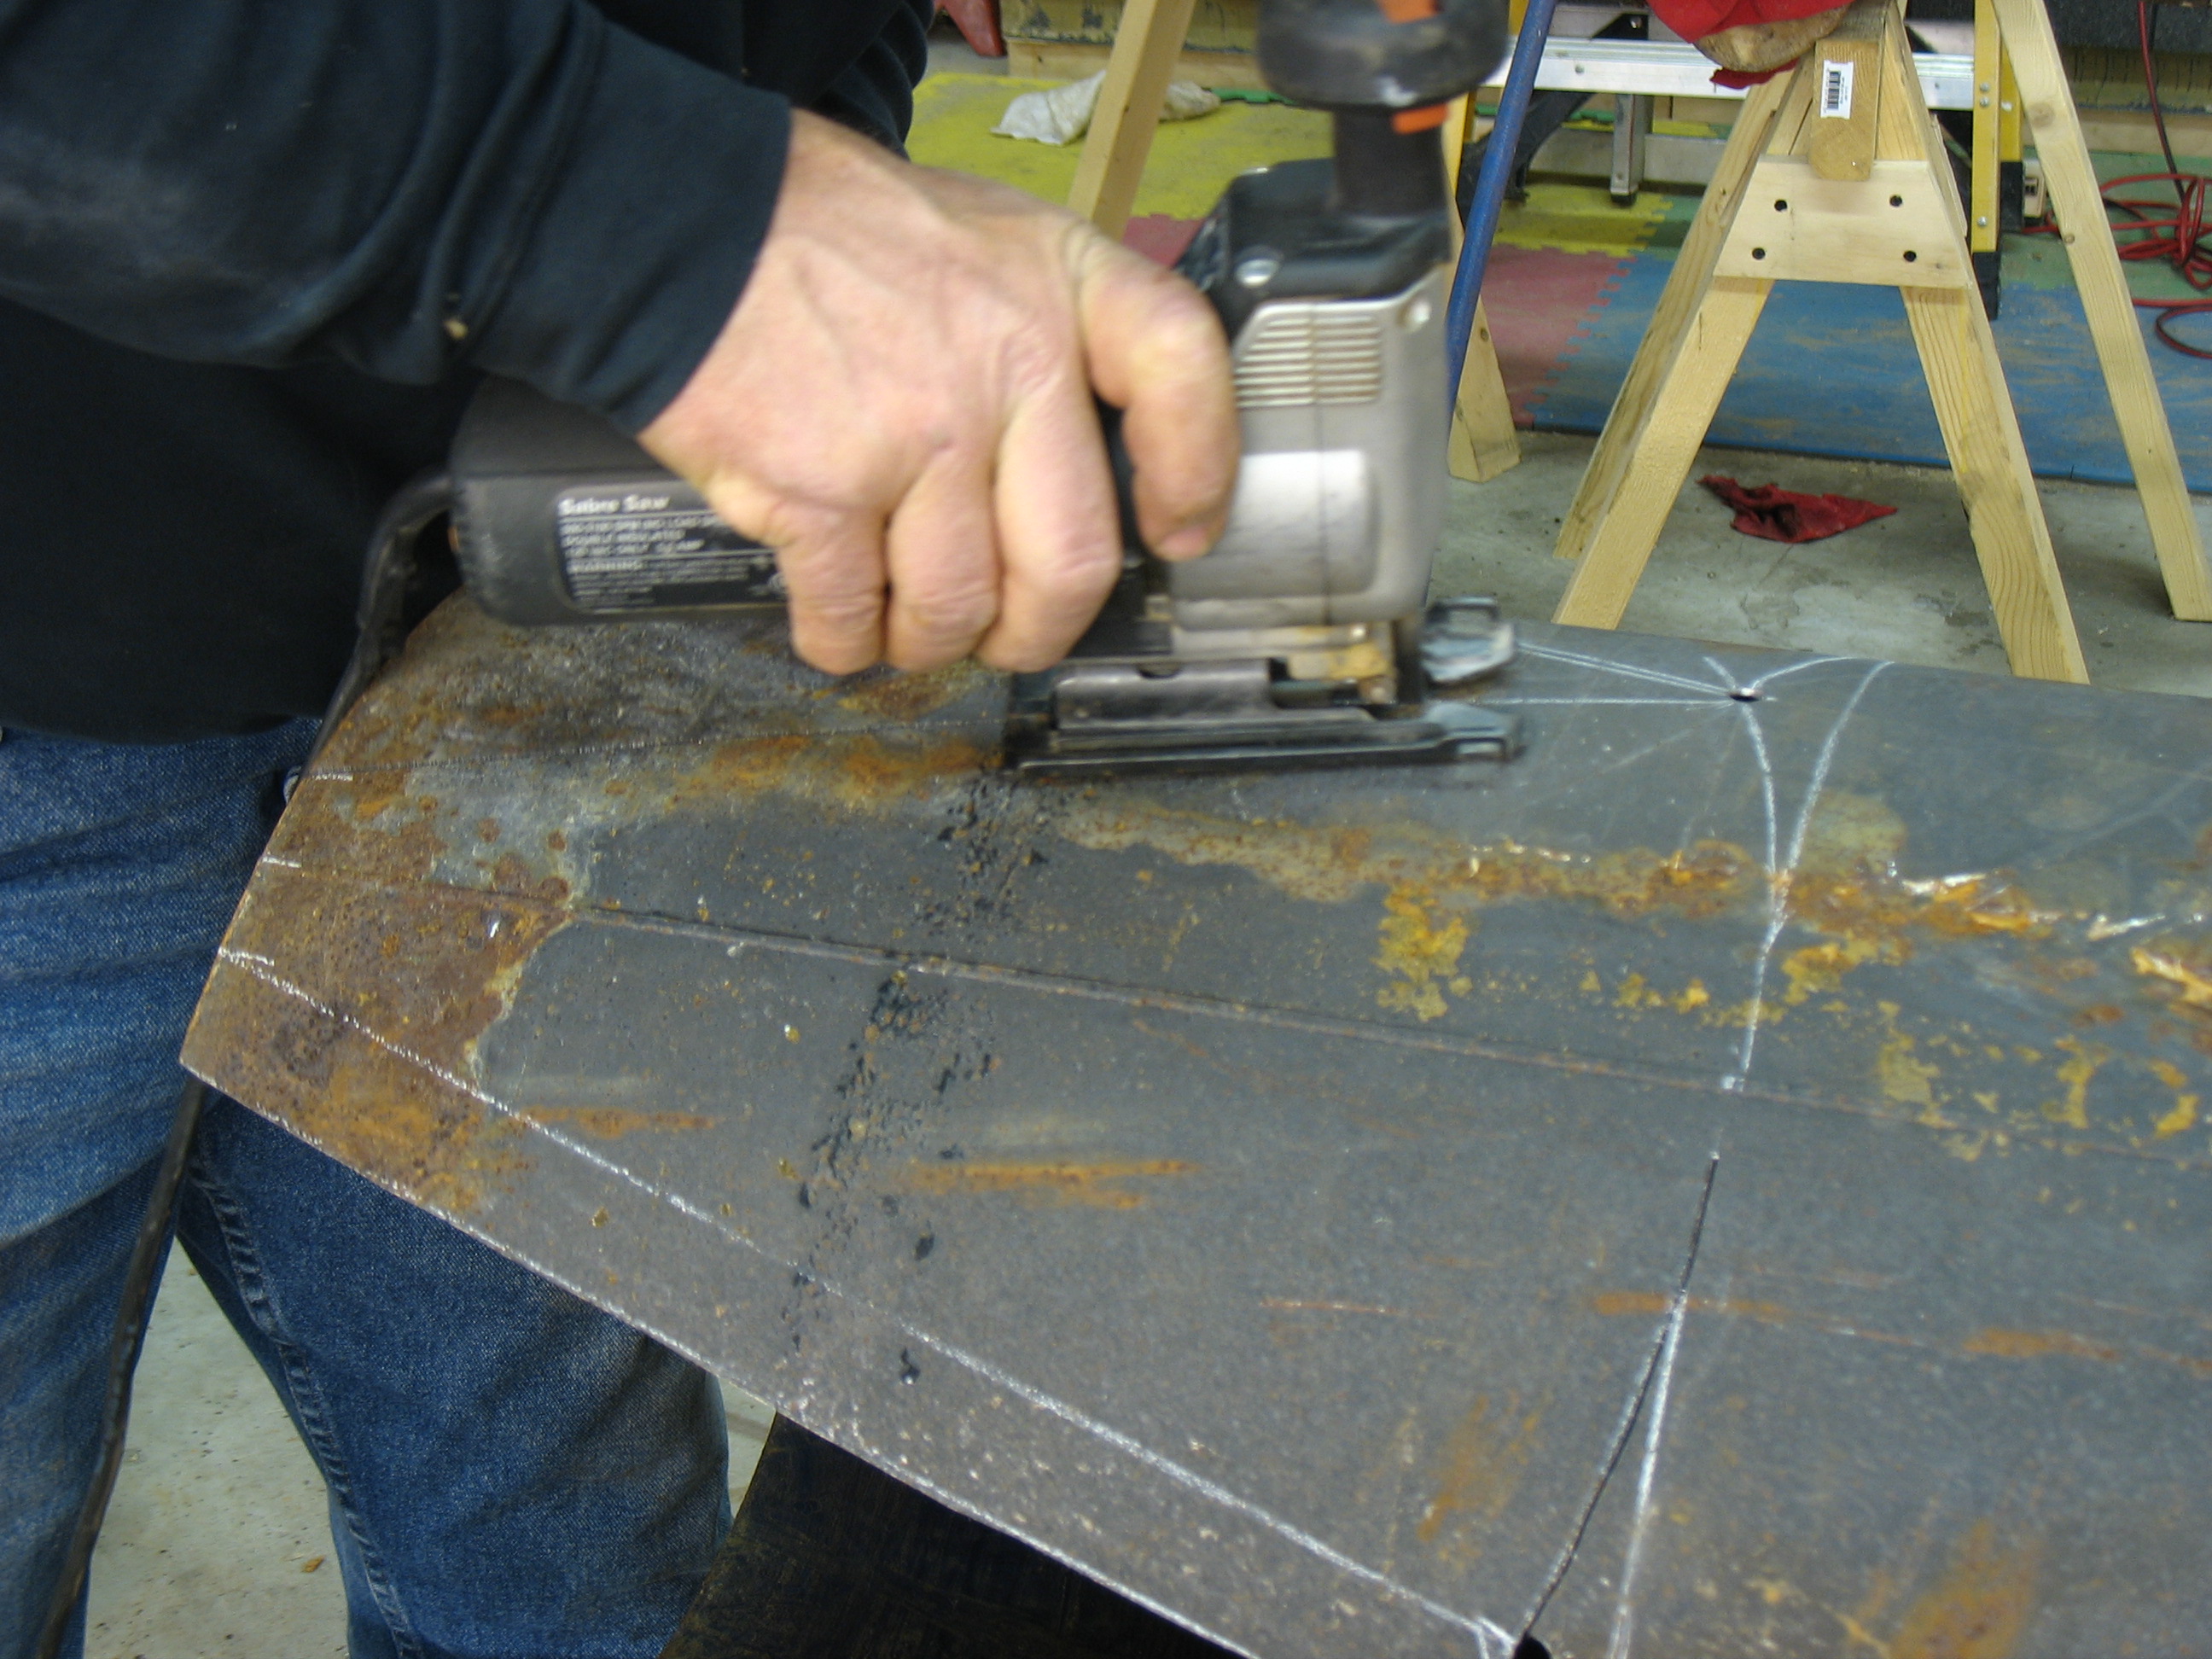 All you need is a metal cutting blade in your sabre saw